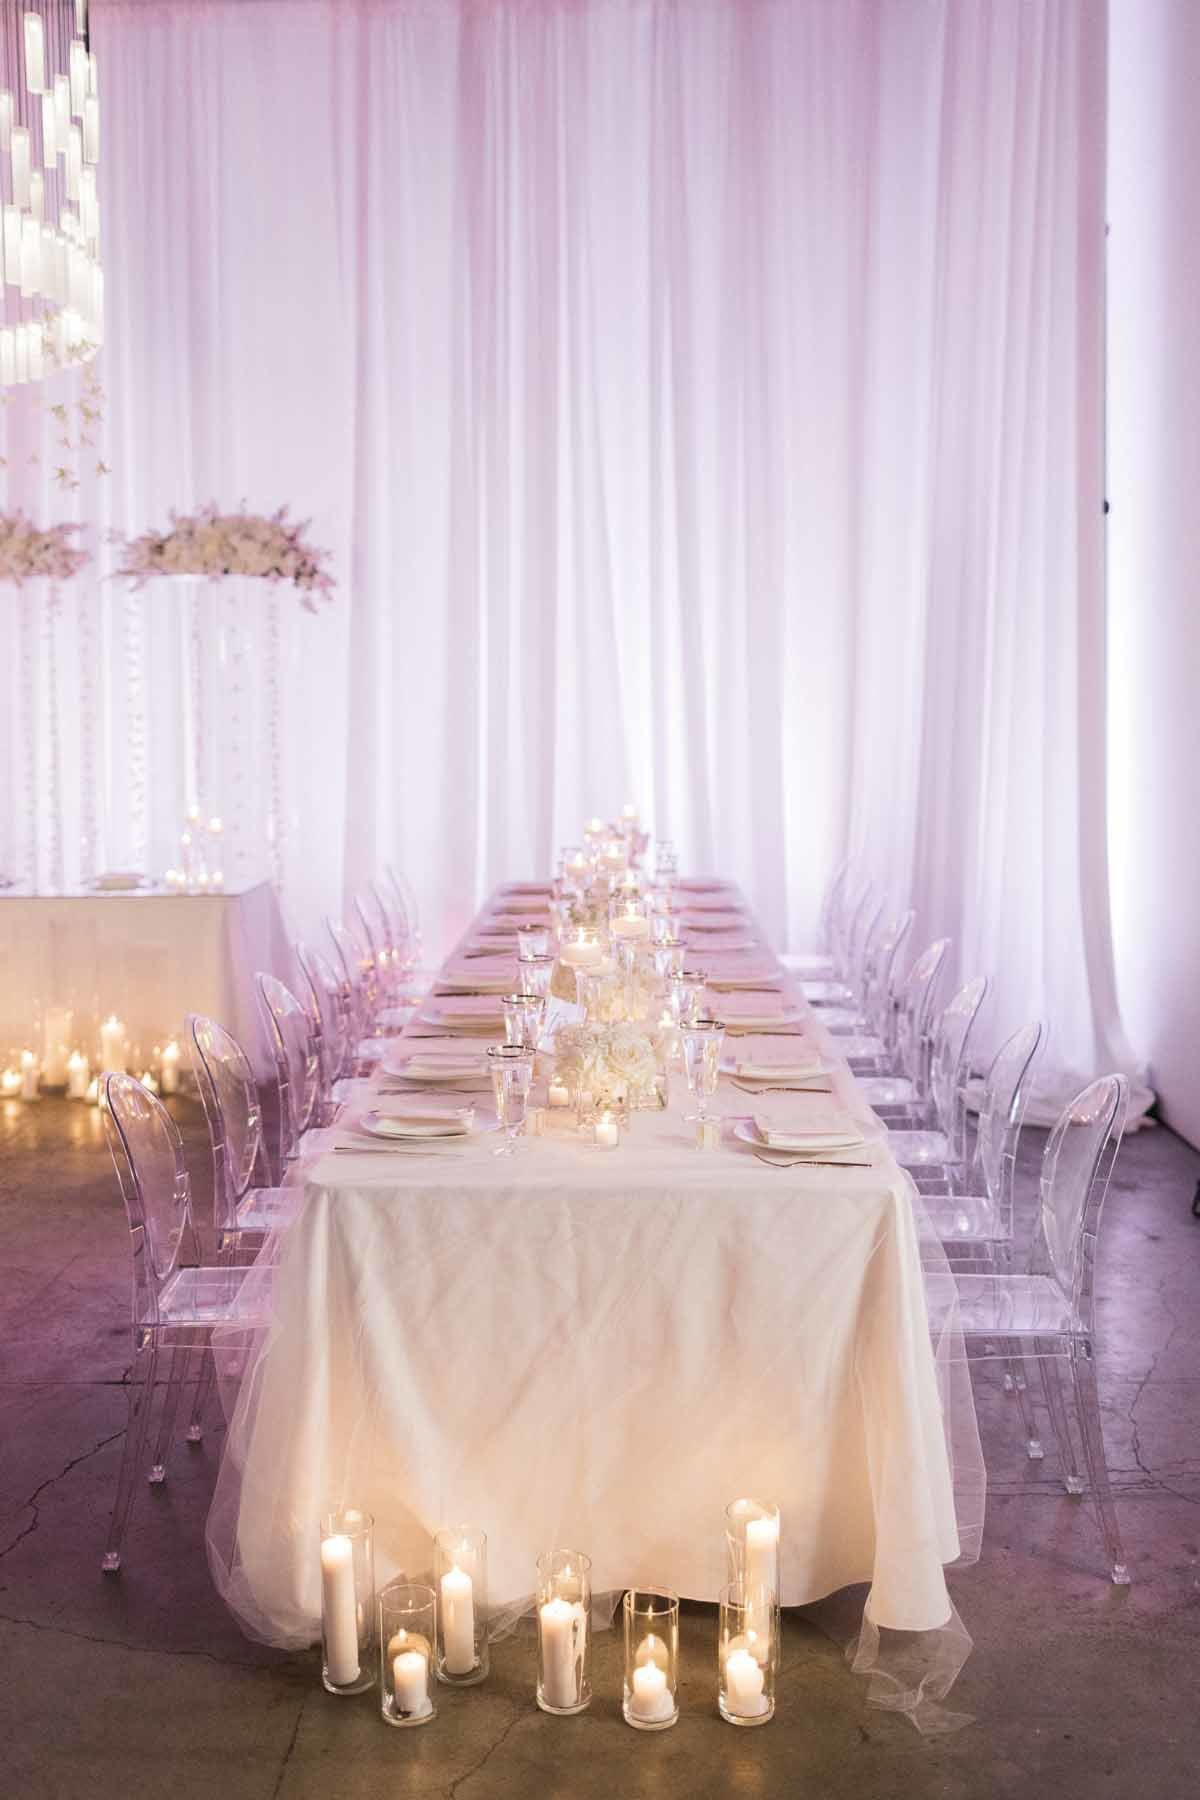 These beautiful long white tables with ghost chairs designed by Flora Nova Design make for a stunning wedding reception.